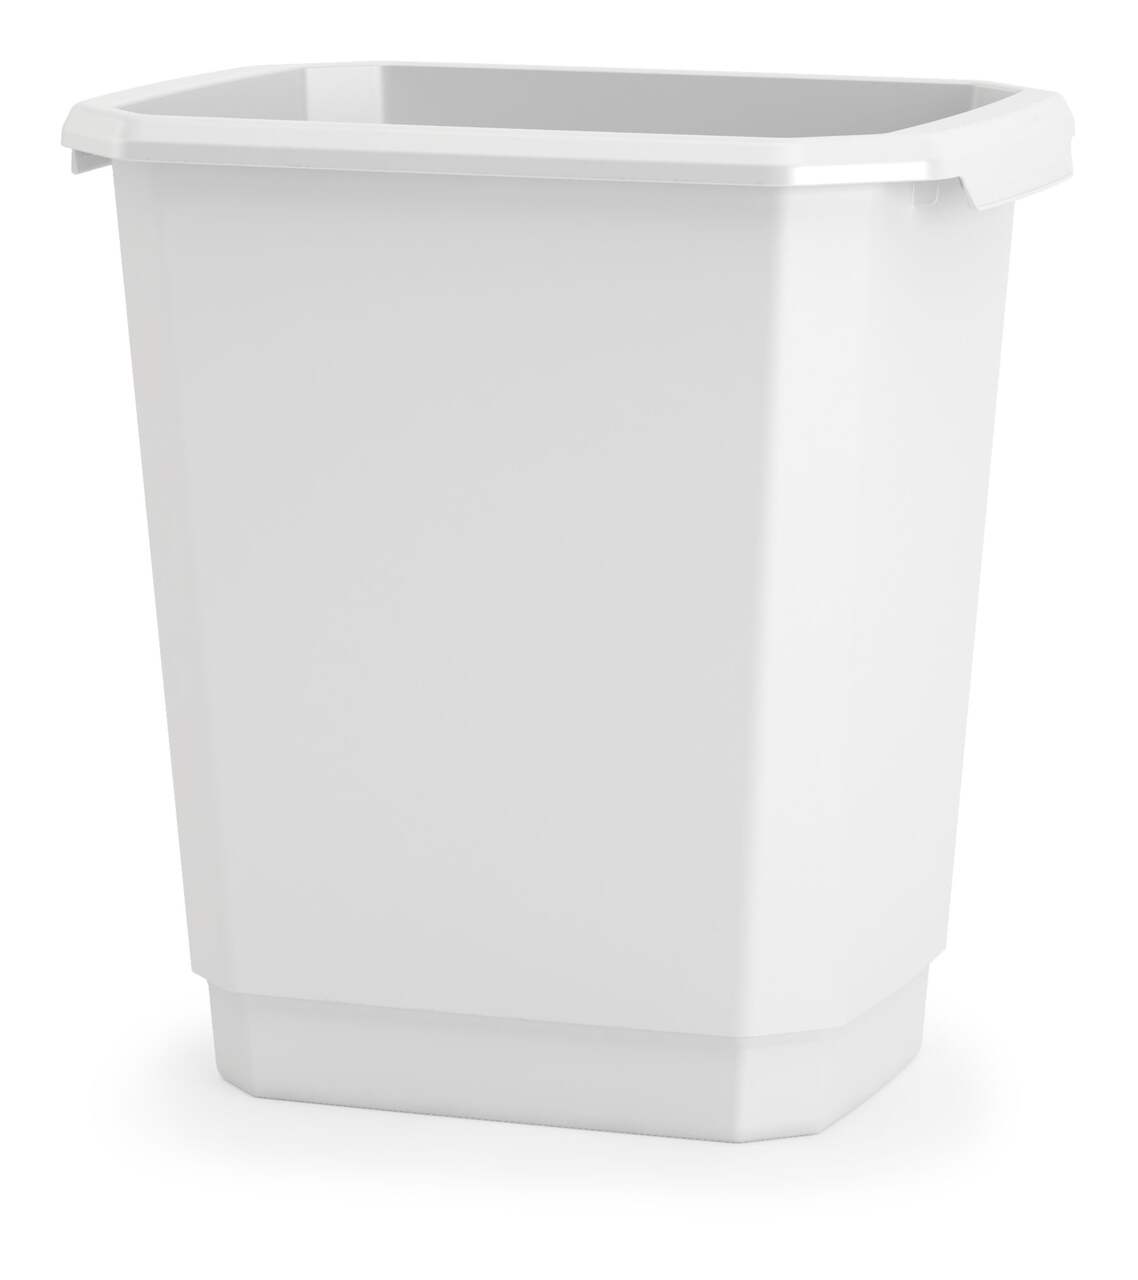 https://media-www.canadiantire.ca/product/living/cleaning/refuse-containers/1424786/type-a-14l-open-bin-white-700e6f07-56c9-4422-abcc-8fa69dd3e095-jpgrendition.jpg?imdensity=1&imwidth=640&impolicy=mZoom